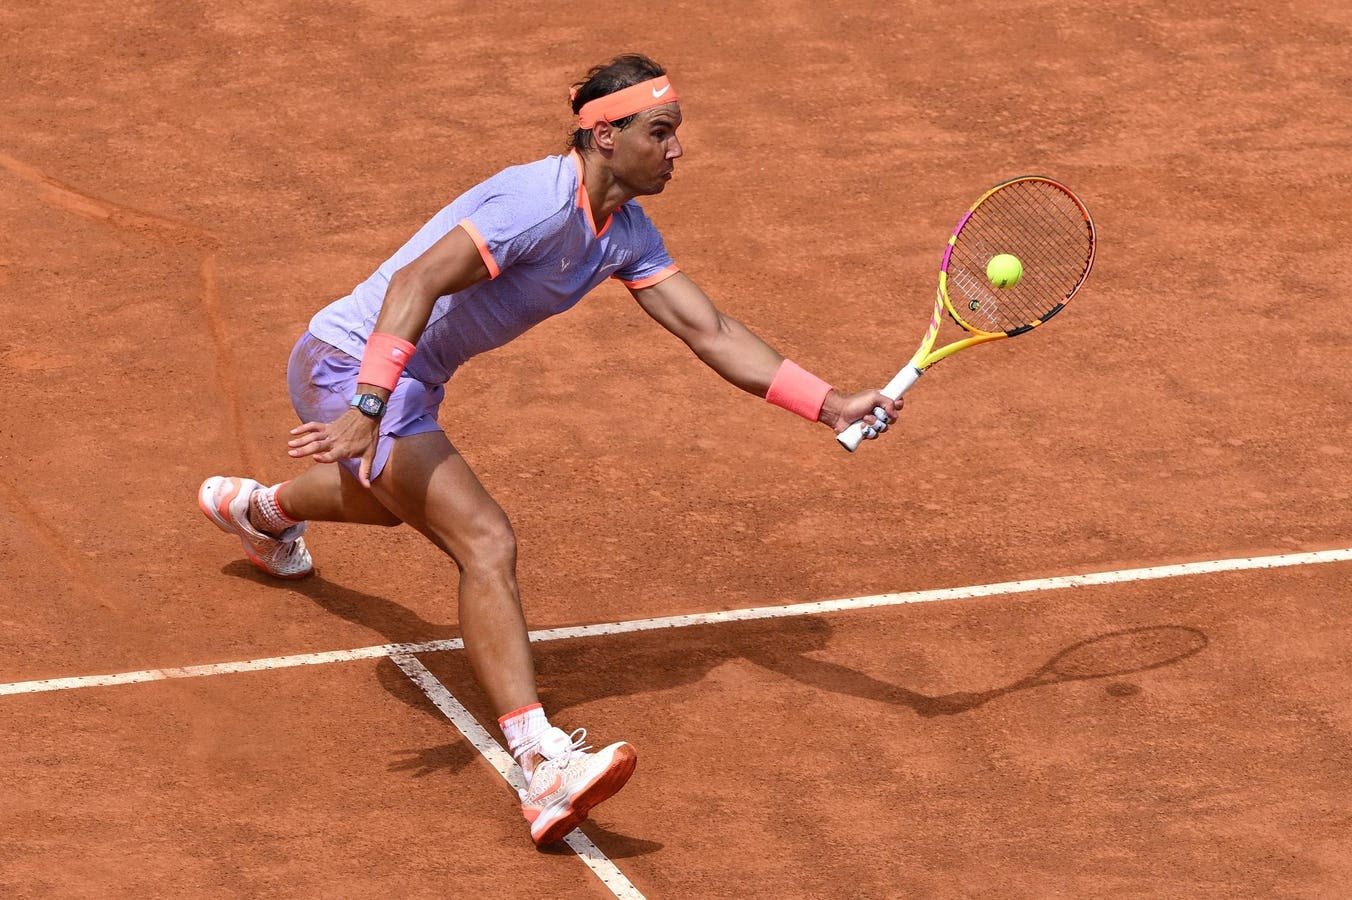 Rafael Nadal Uncertain About French Open After Getting Crushed In Rome